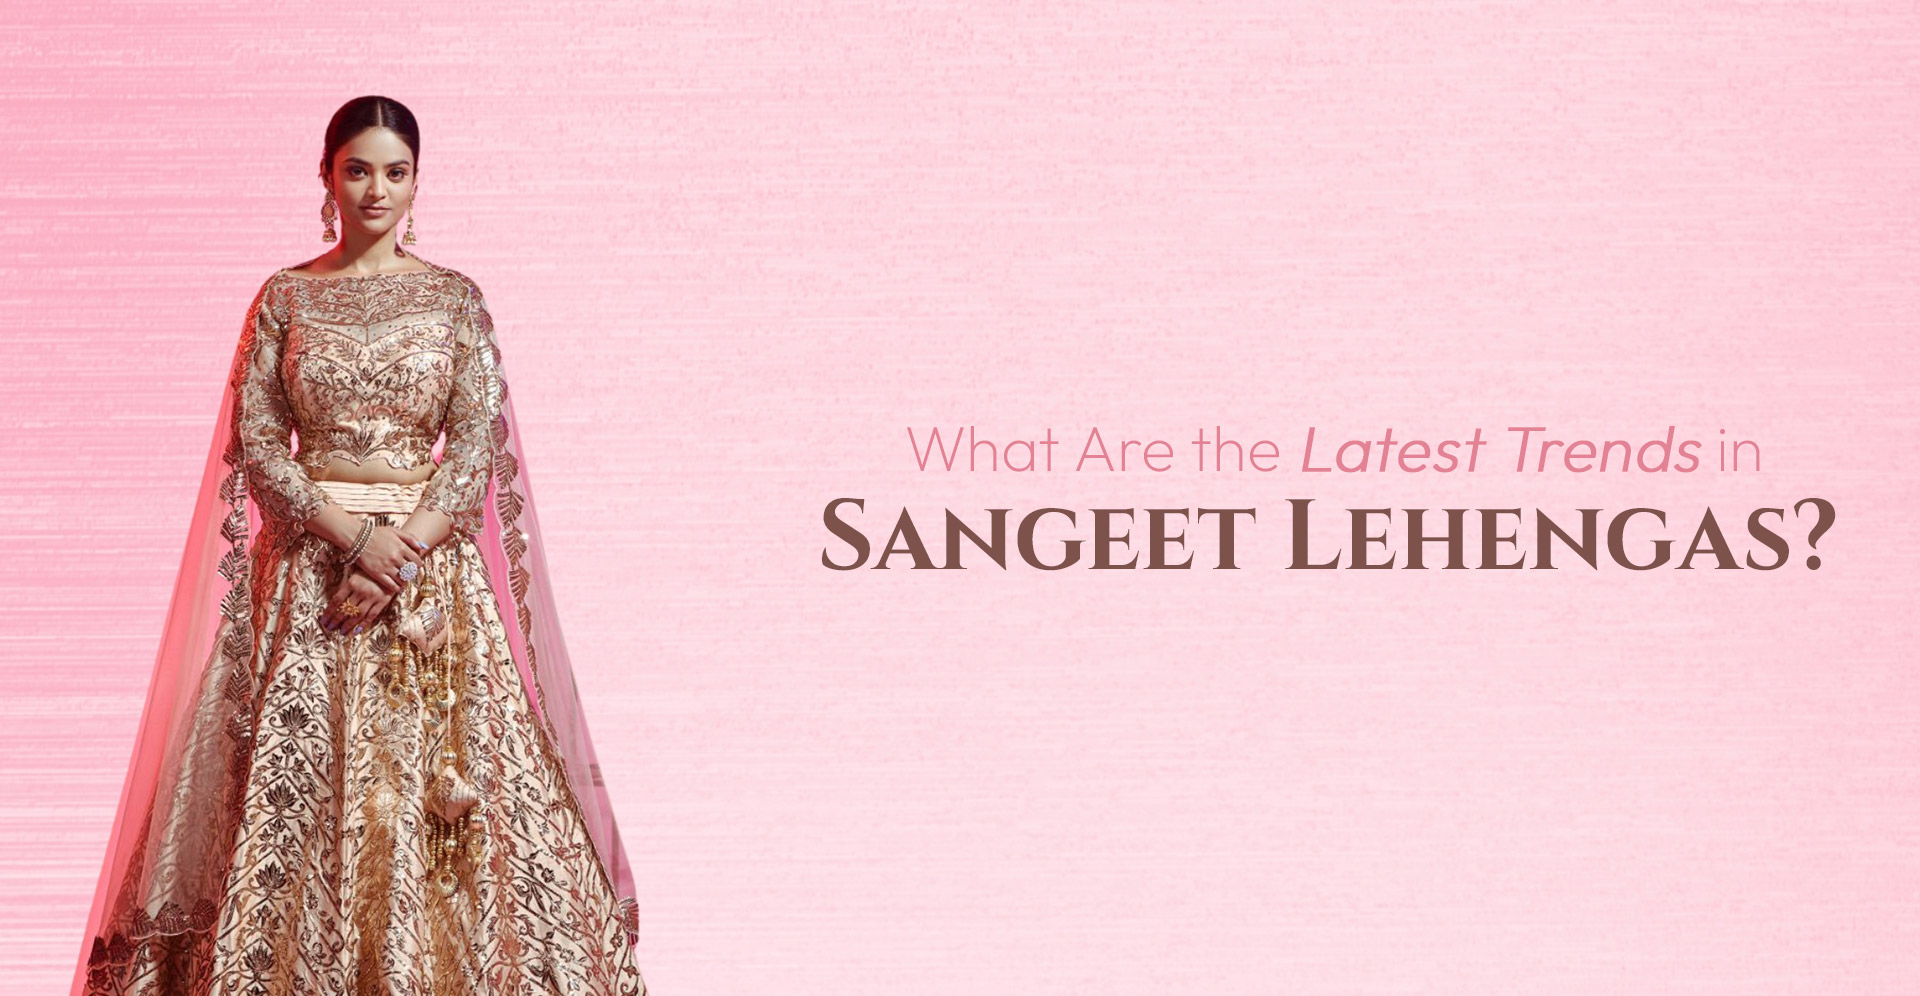 What Are the Latest Trends in Sangeet Lehengas?